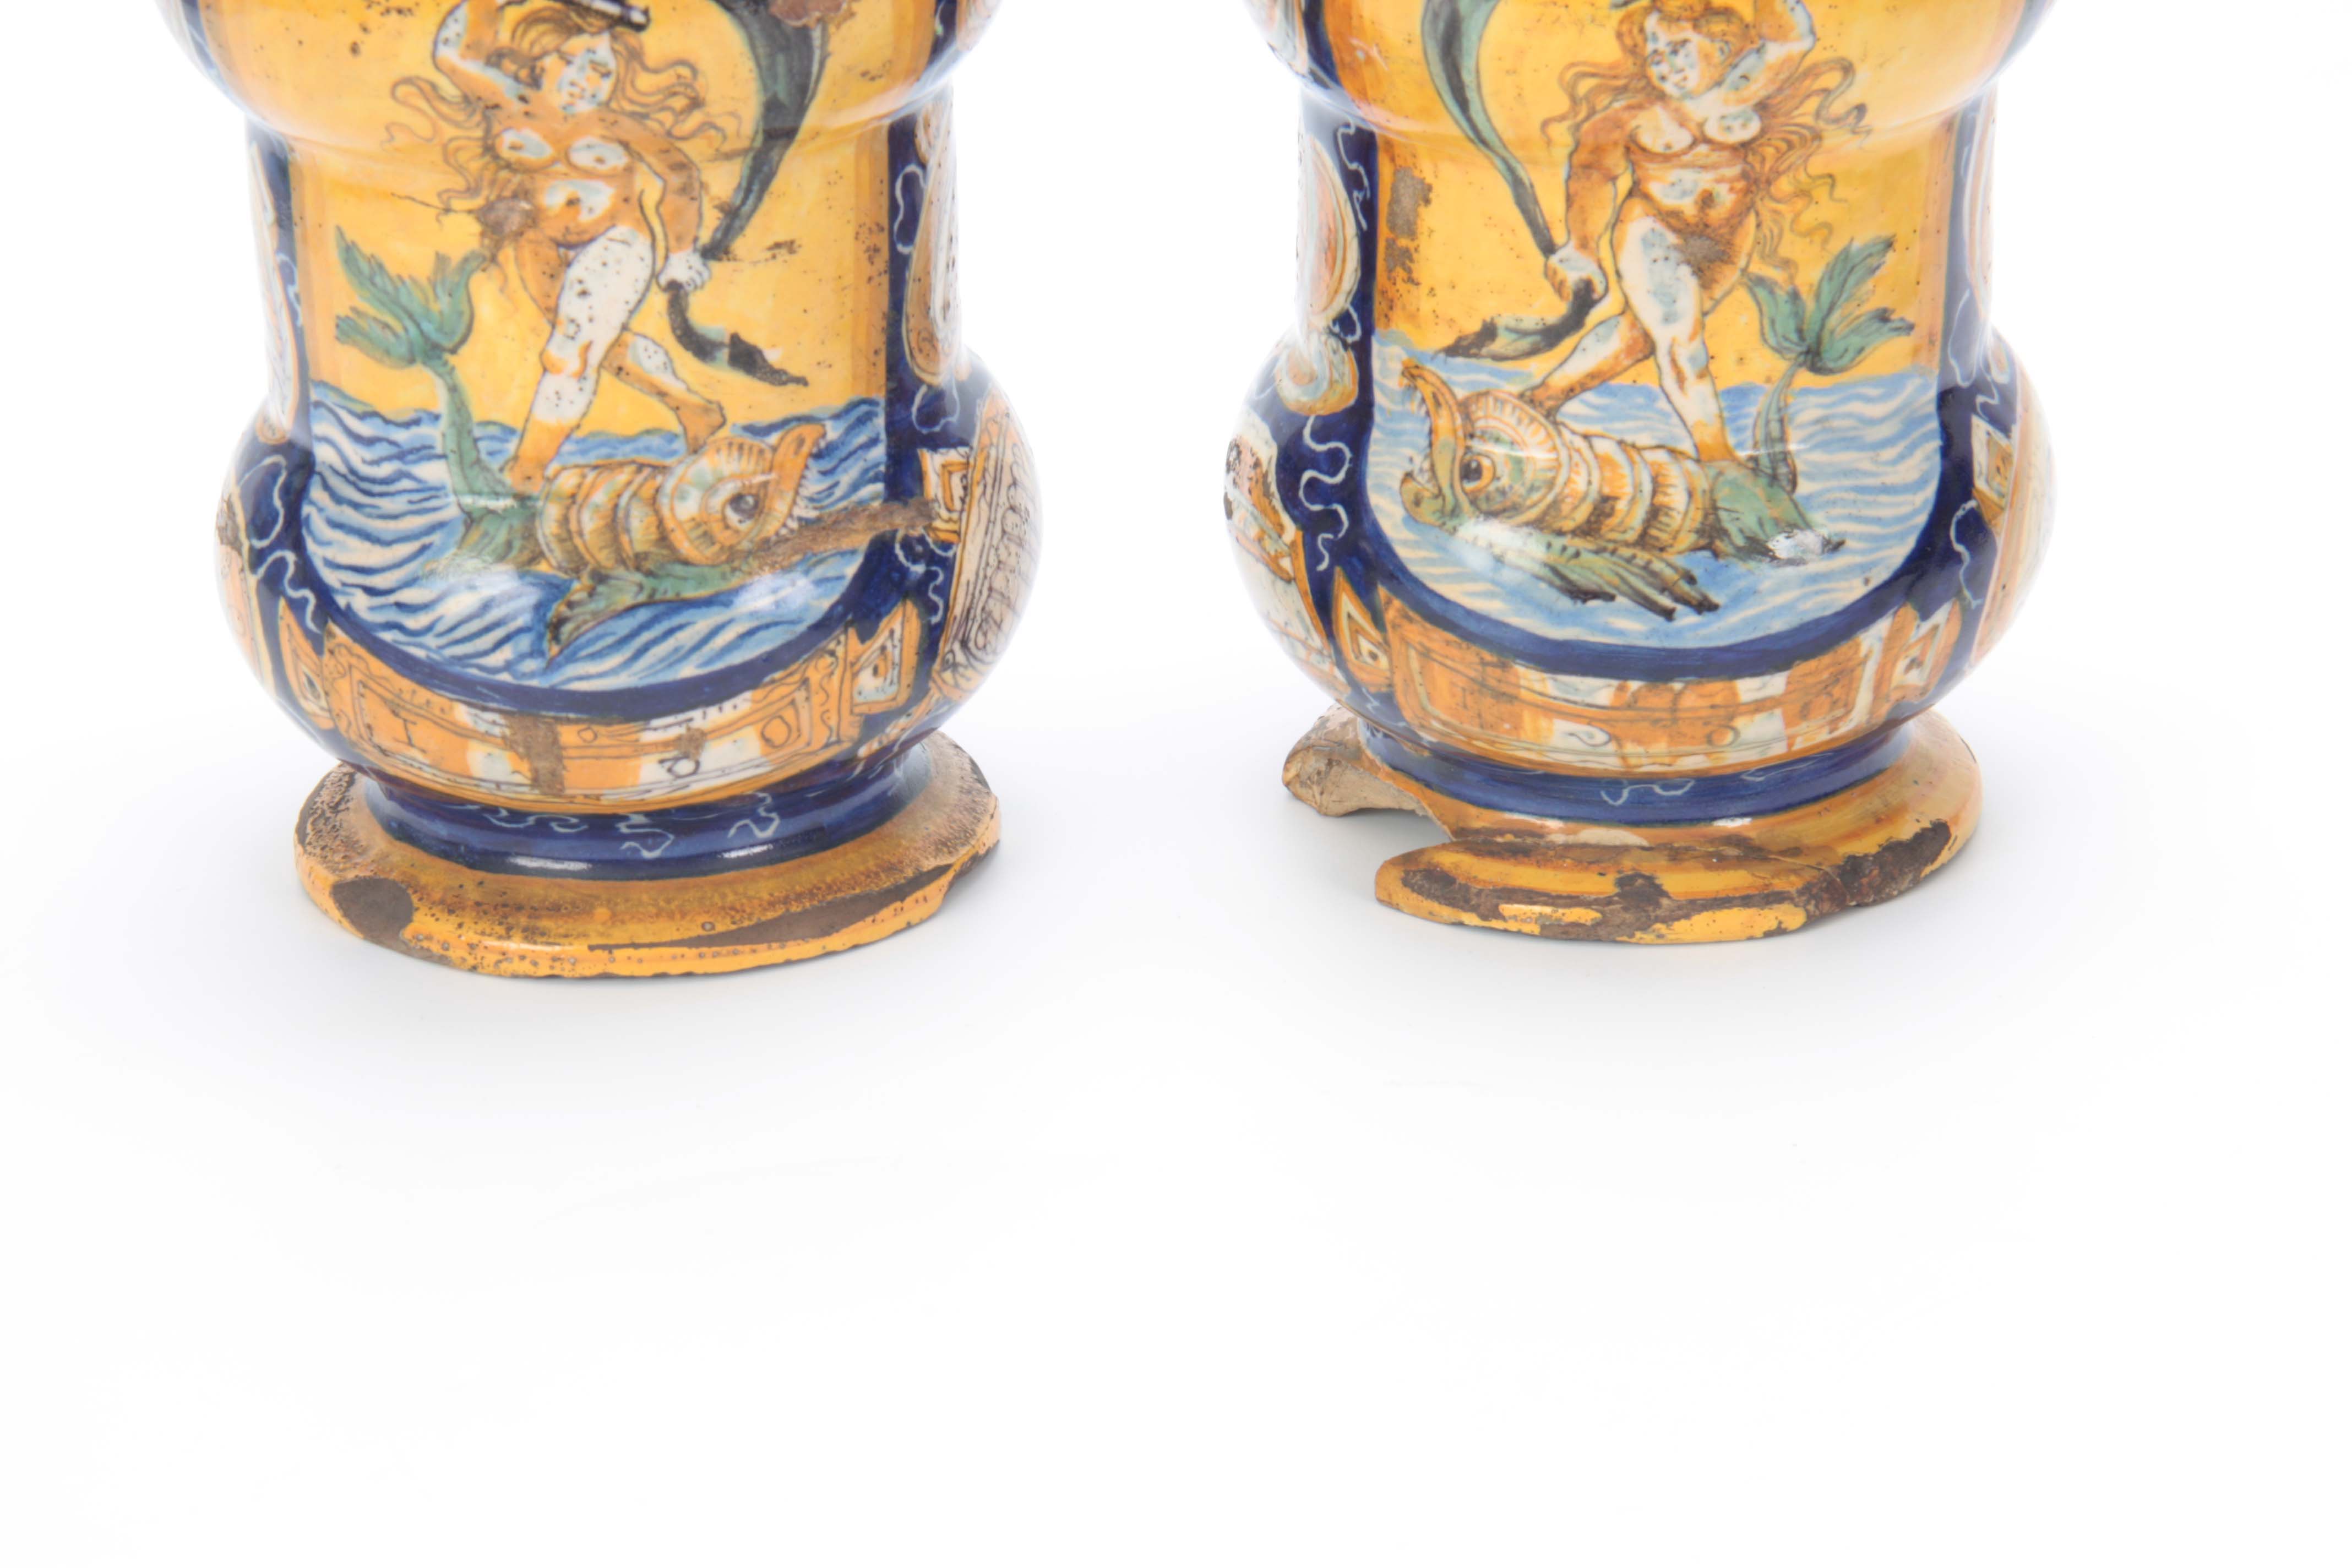 A PAIR OF CASTEL DURANTE MAIOLICA ALBARELLI DATED 1580 each painted with Venus riding a dolphin - Image 5 of 7